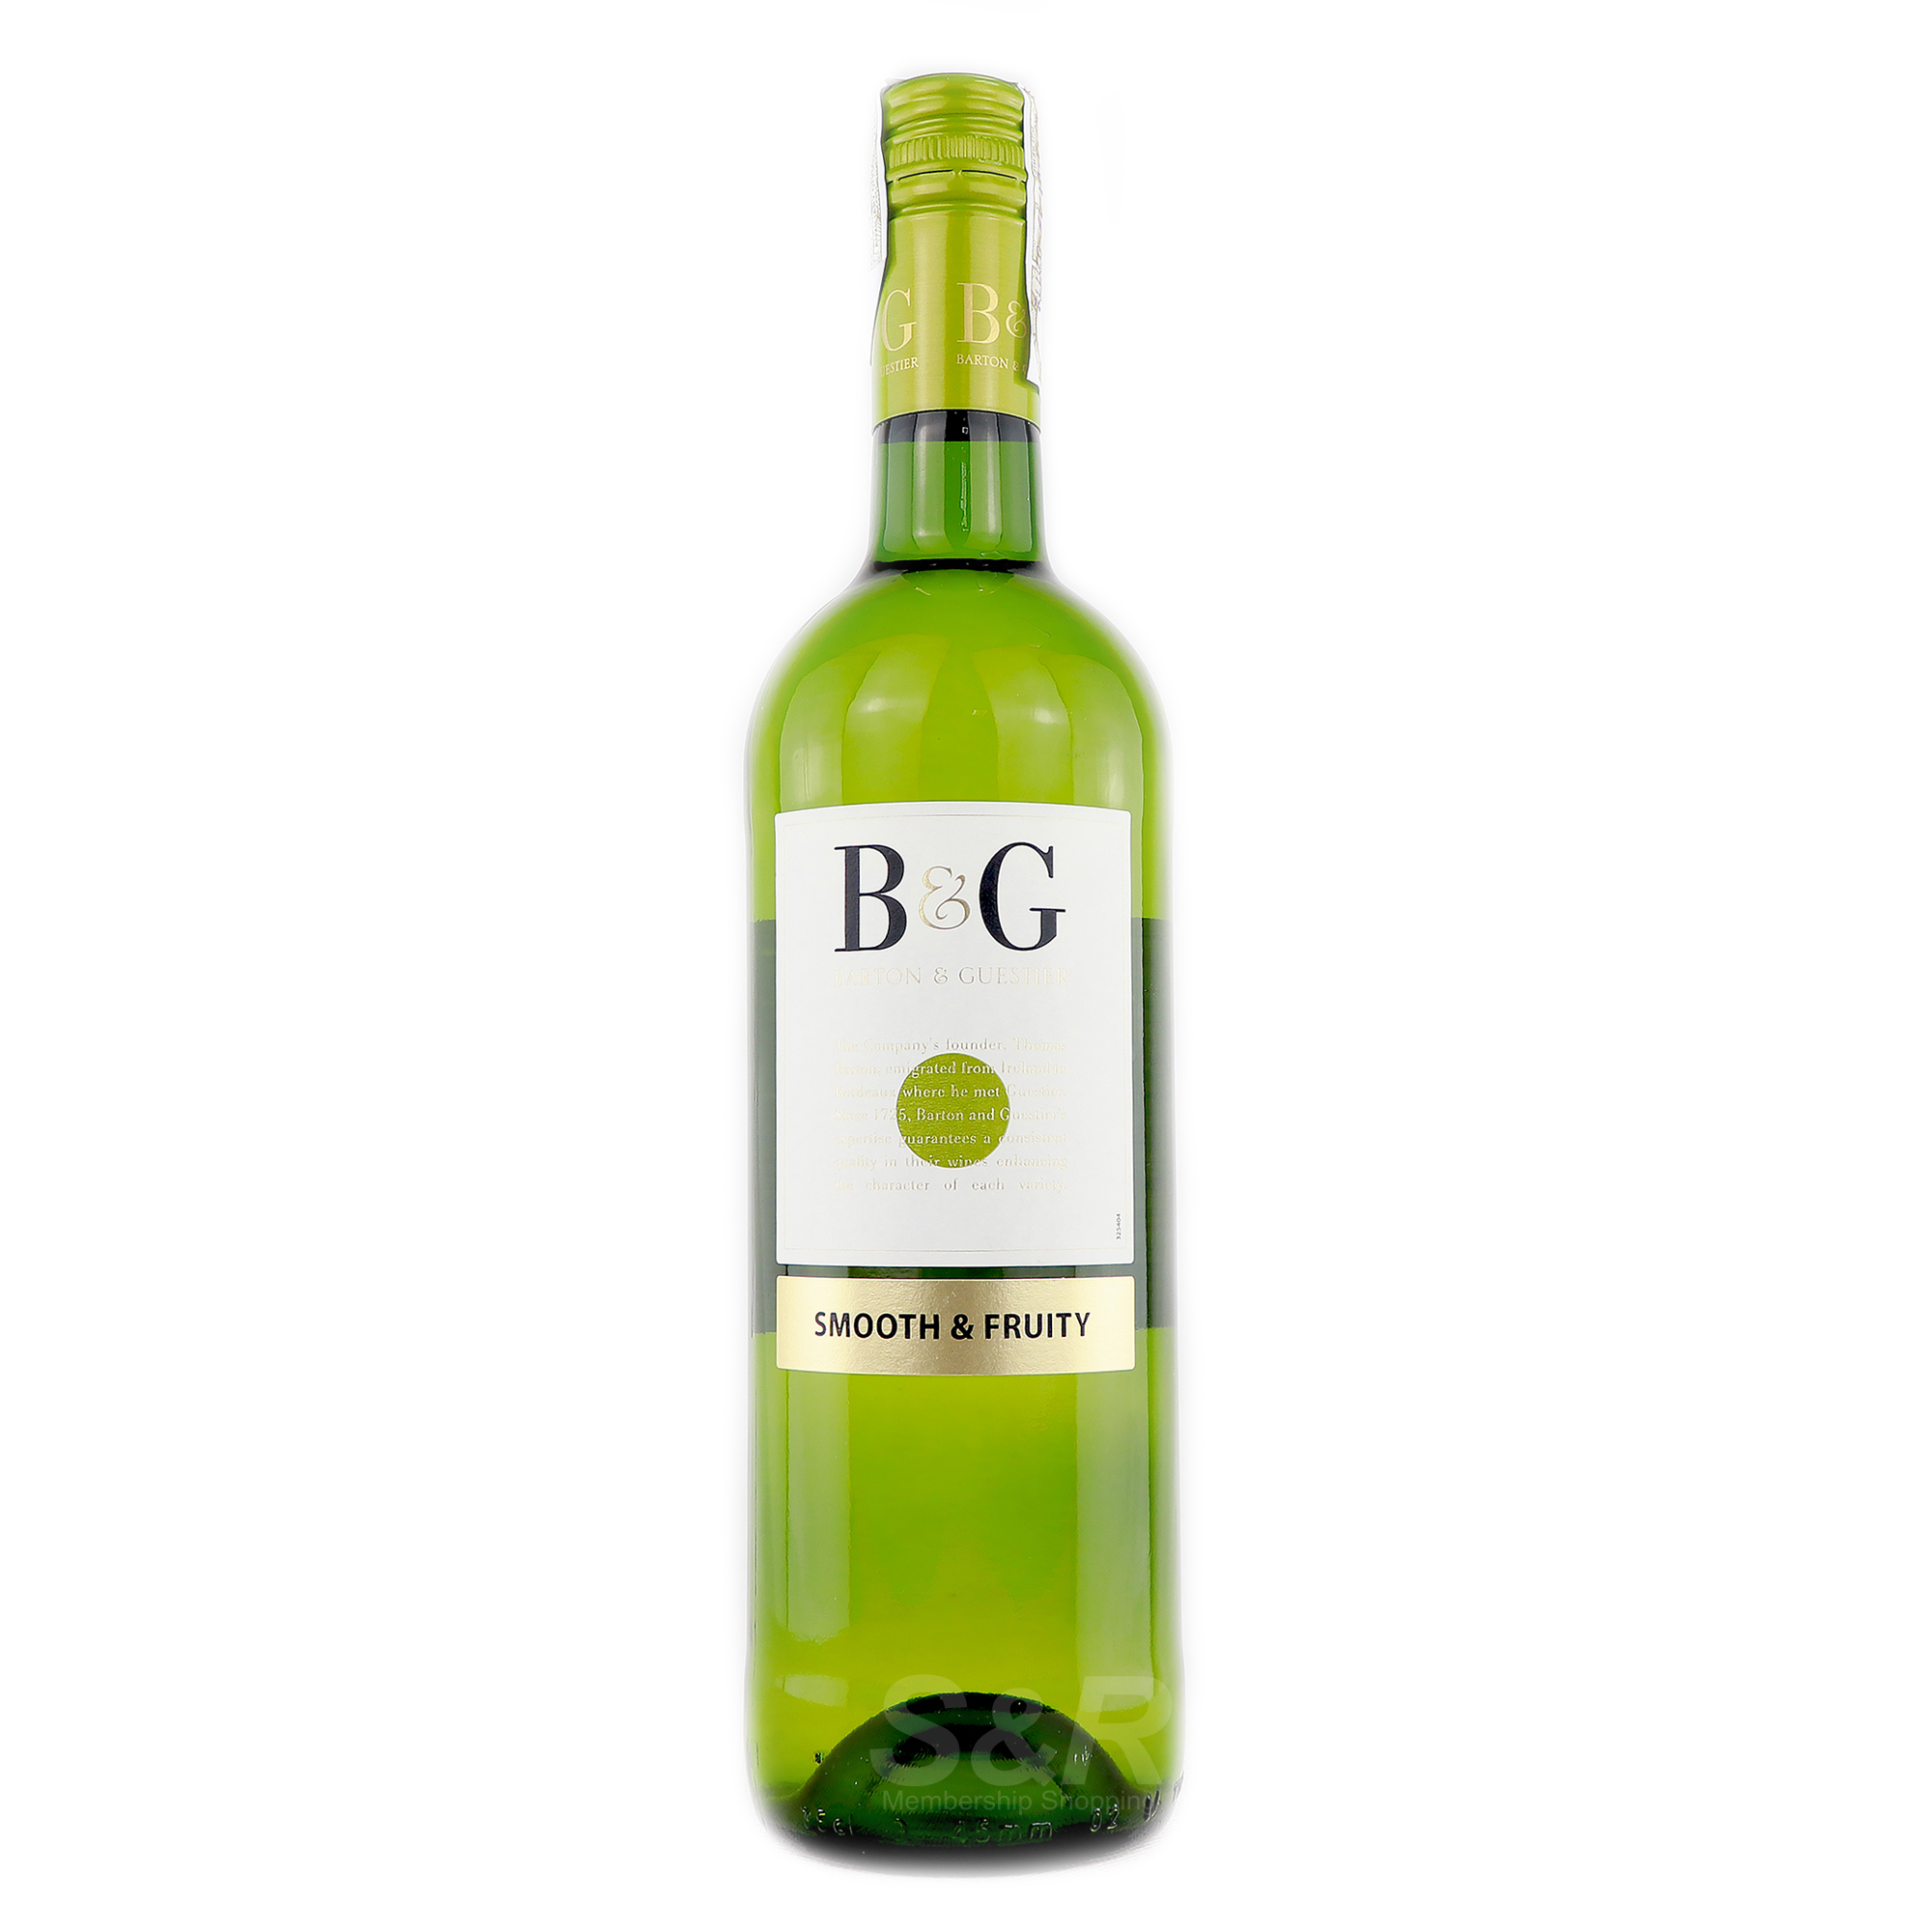 Barton & Guestier Smooth and Fruity White Wine 750mL